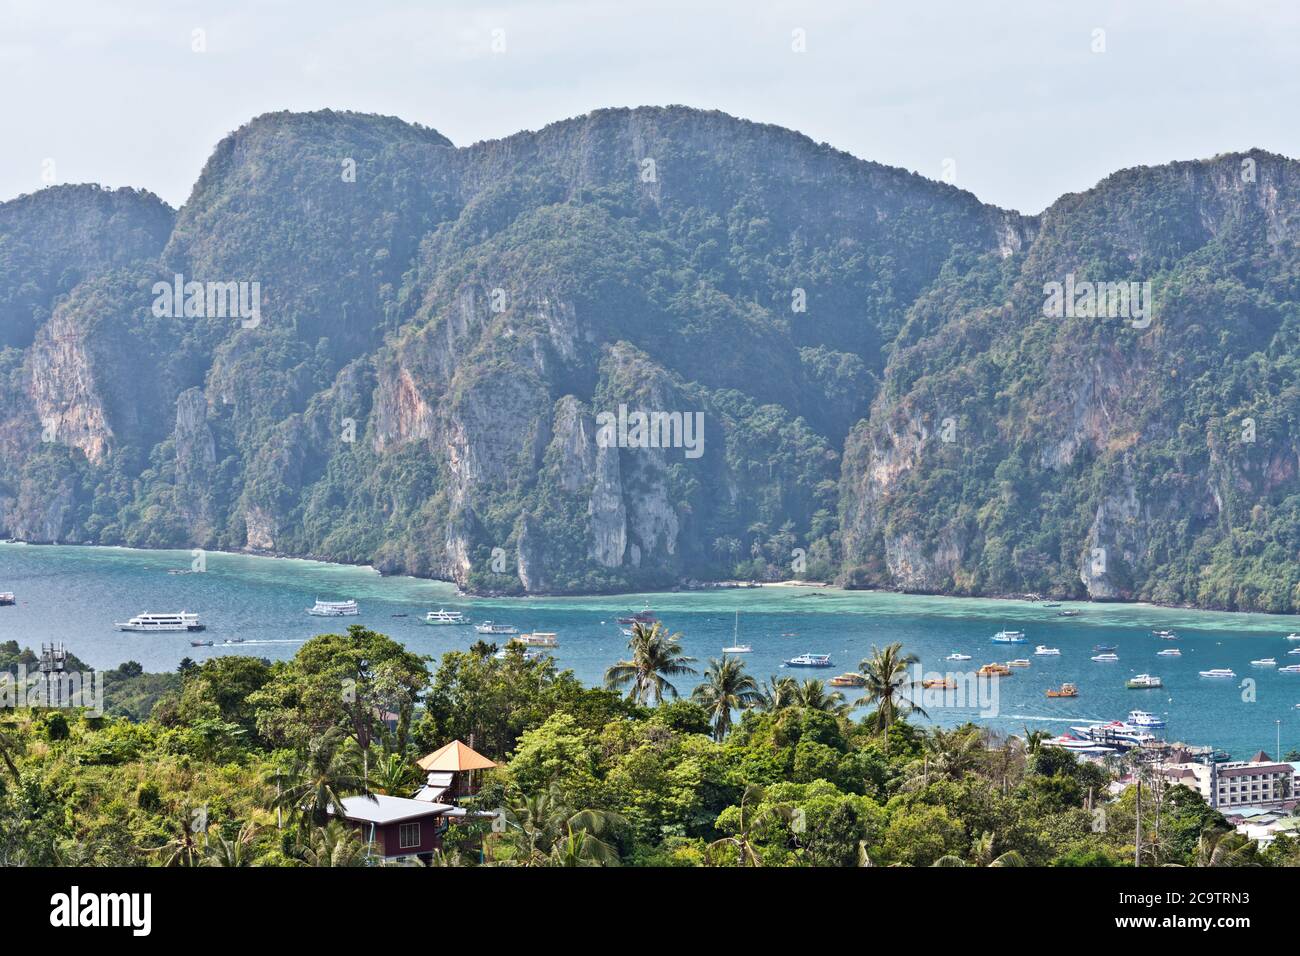 Beautiful Scenery with Palms and Mountains seen from Koh Phi Phi Viewpoint (Koh Phi Phi Don) on Koh Phi Phi Island, Thailand, Asia Stock Photo